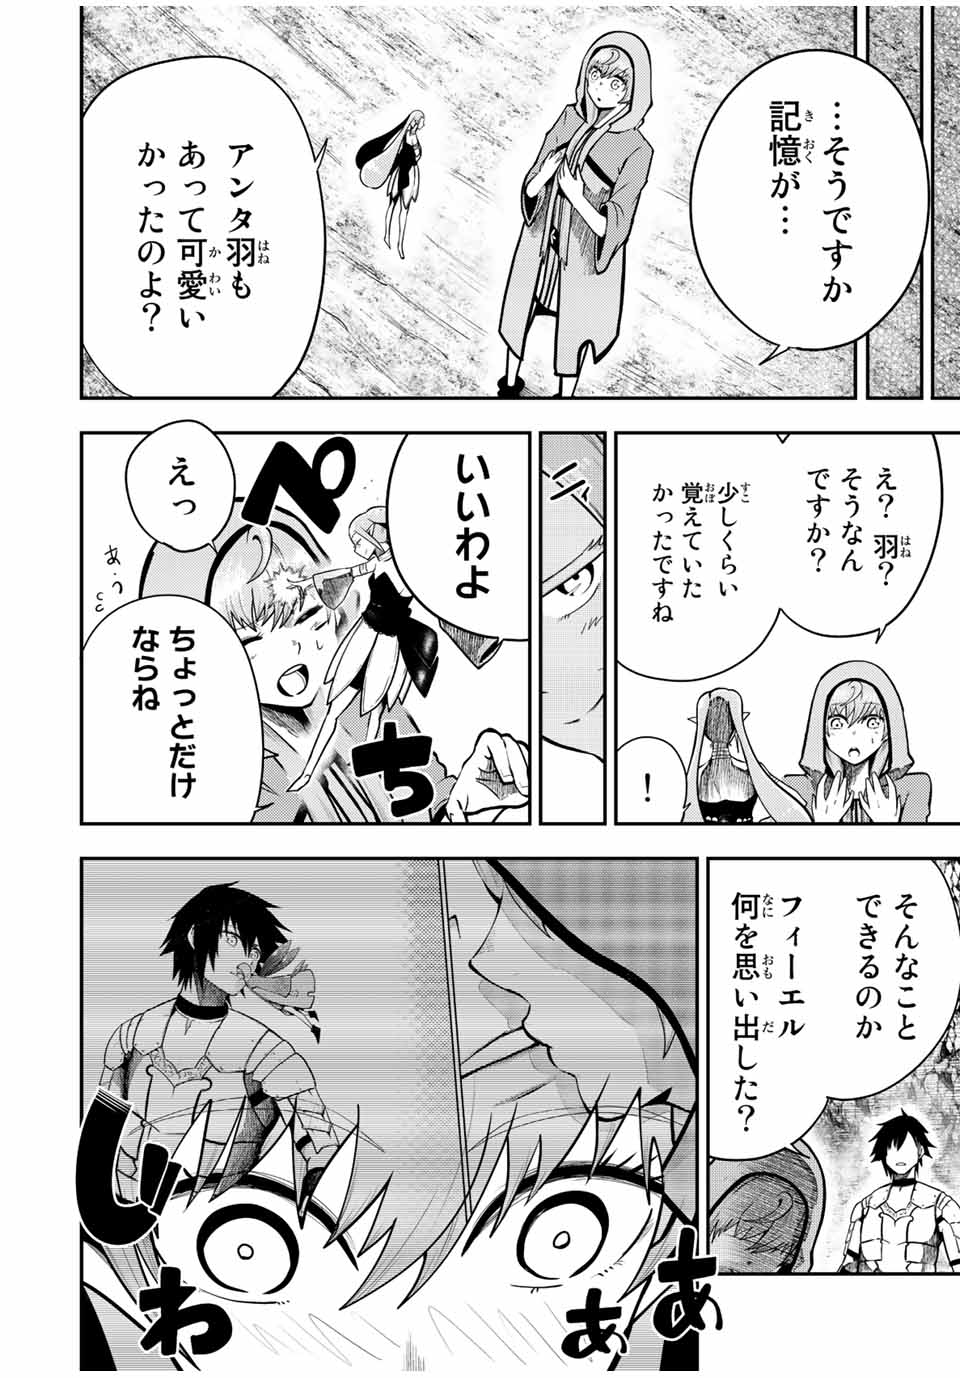 the strongest former prince-; 奴隷転生 ～その奴隷、最強の元王子につき～ 第78話 - Page 4